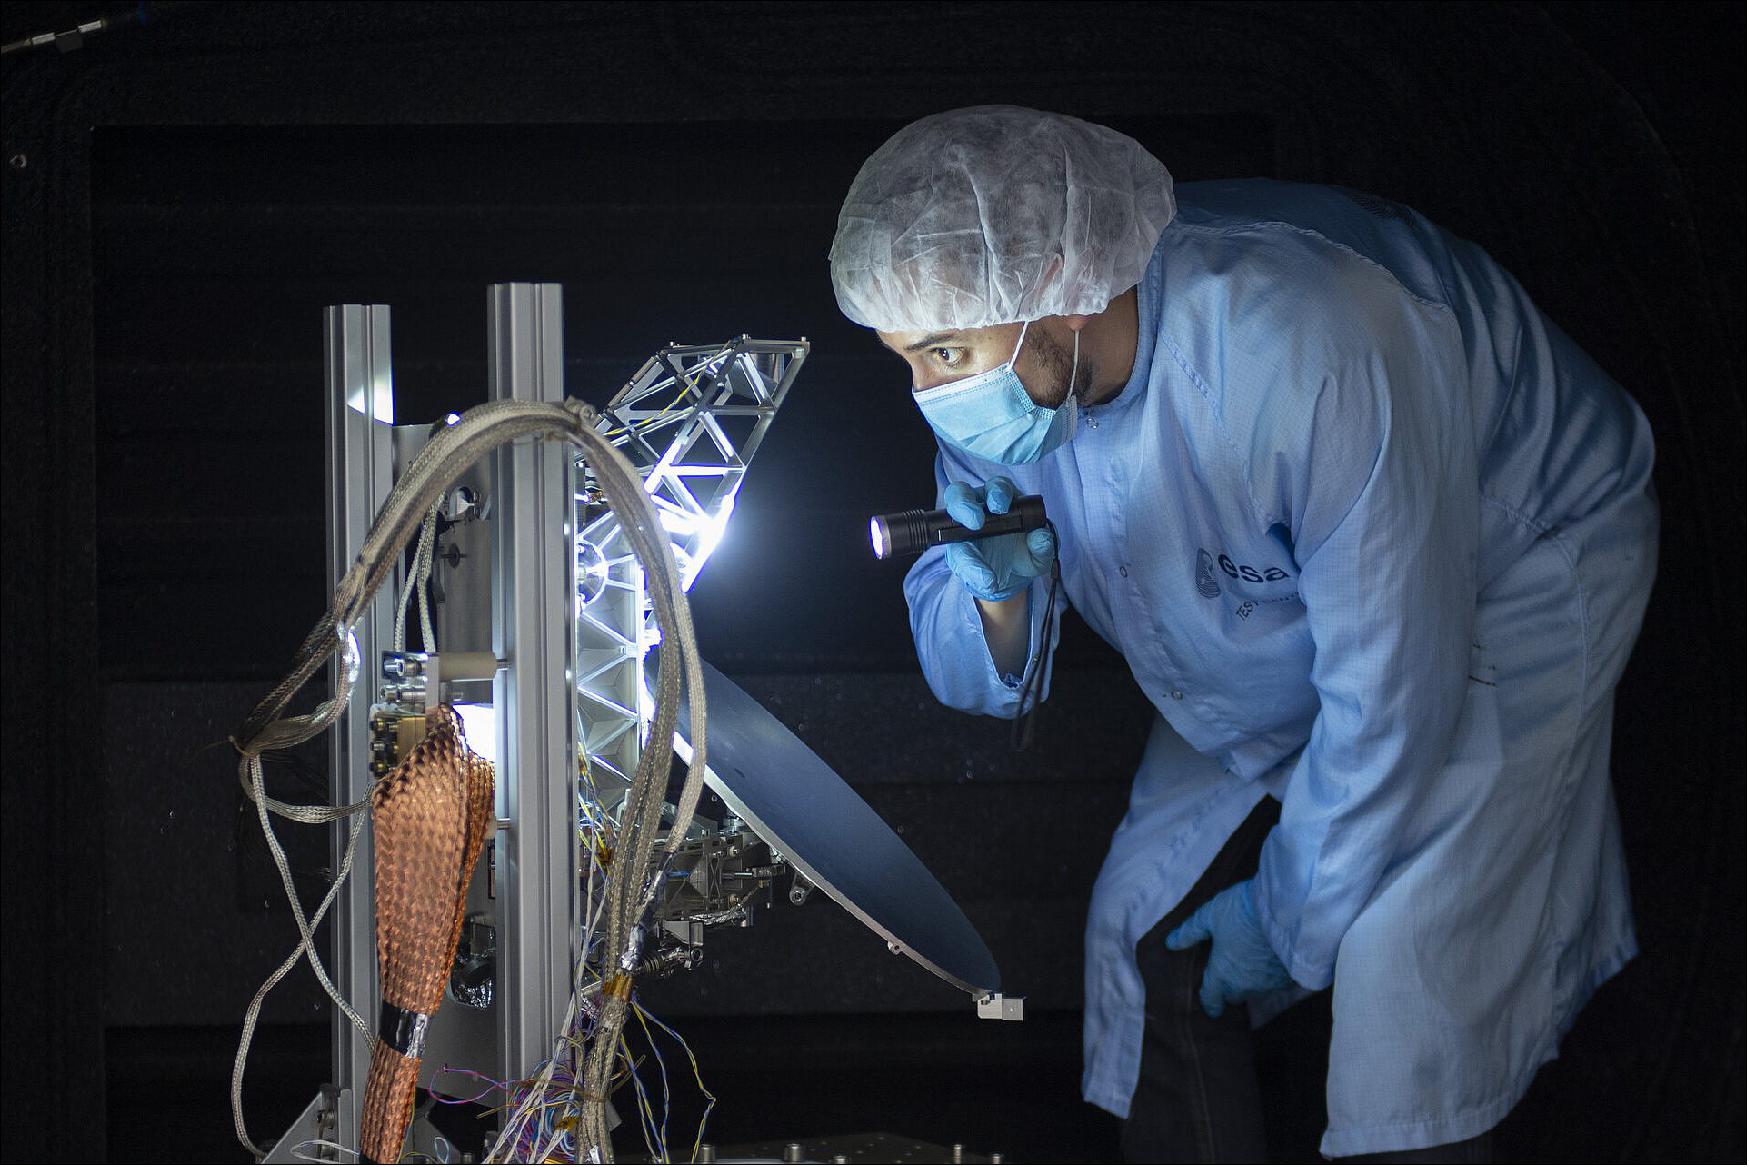 Figure 11: The SWI model of the JUICE mission is checked after completing eight days of cryogenic radio-frequency testing in the Lorentz facility at ESTEC (image credit: ESA, G. Porter)